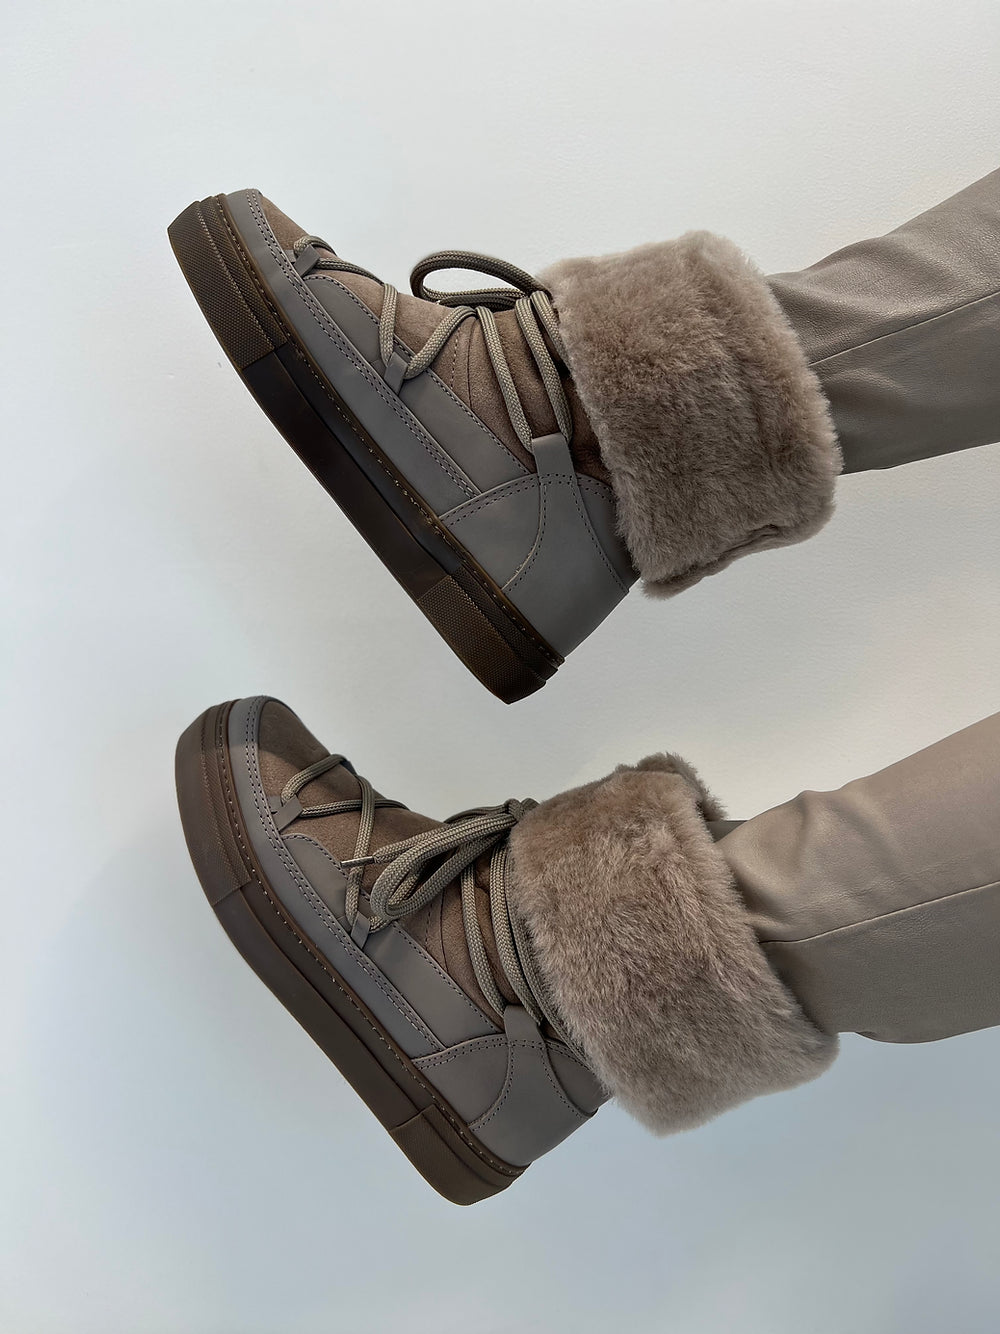 Est Mouton boots - Simply Taupe High